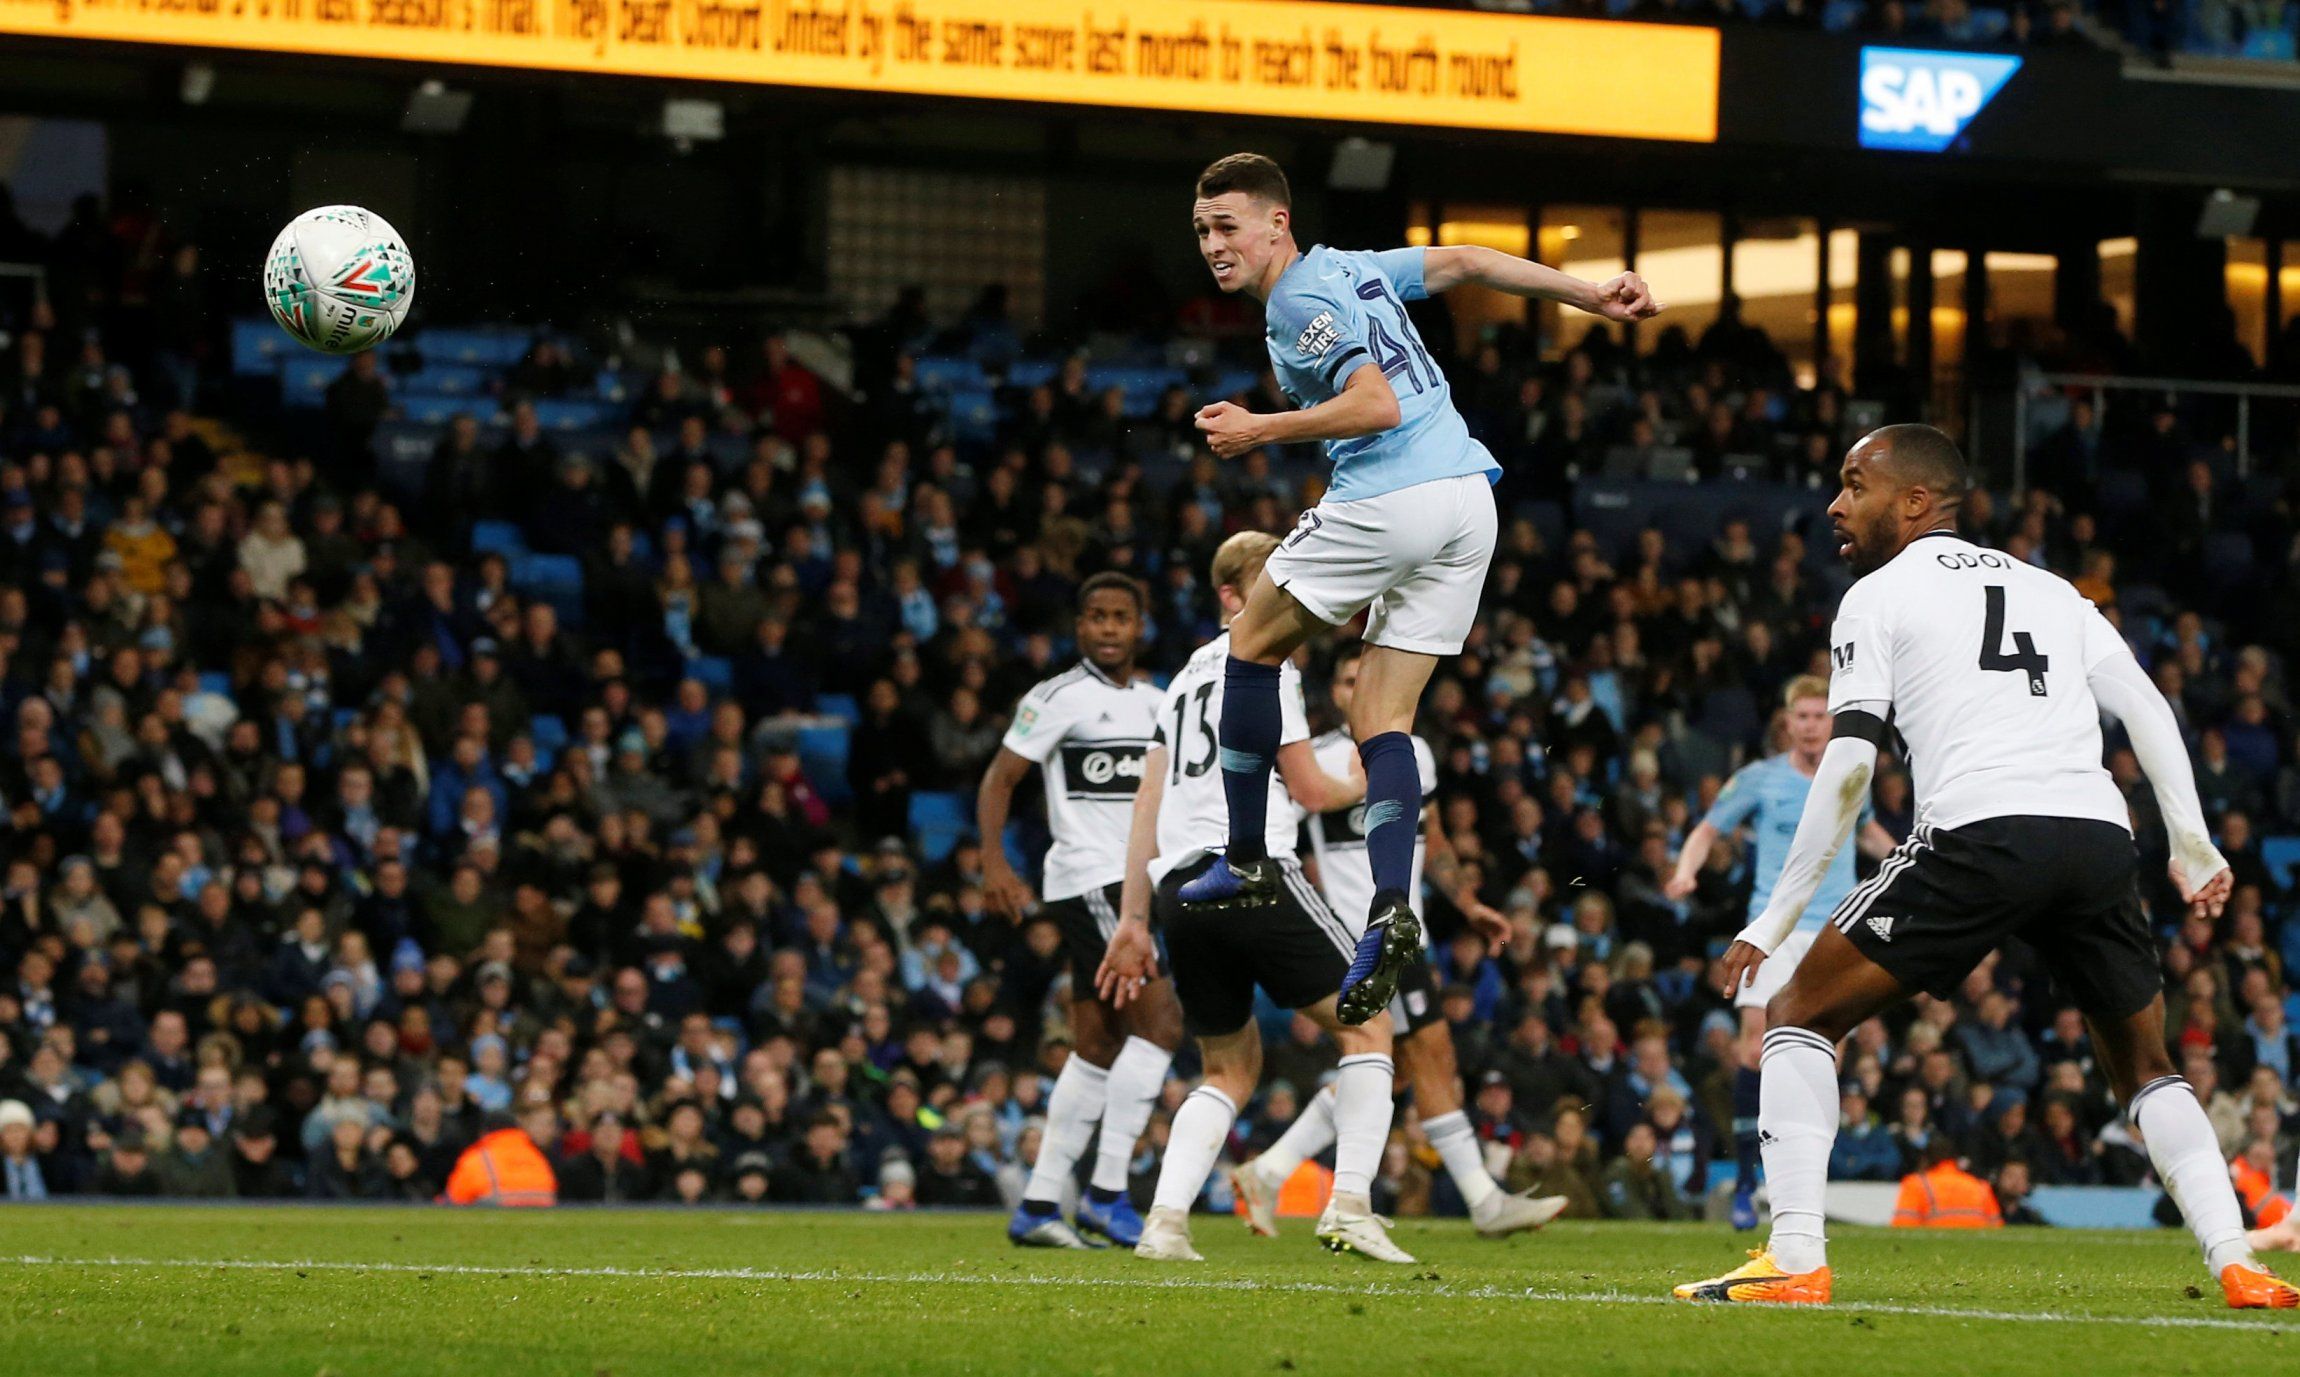 Manchester City's Phil Foden heads at goal vs Fulham in Carabao Cup